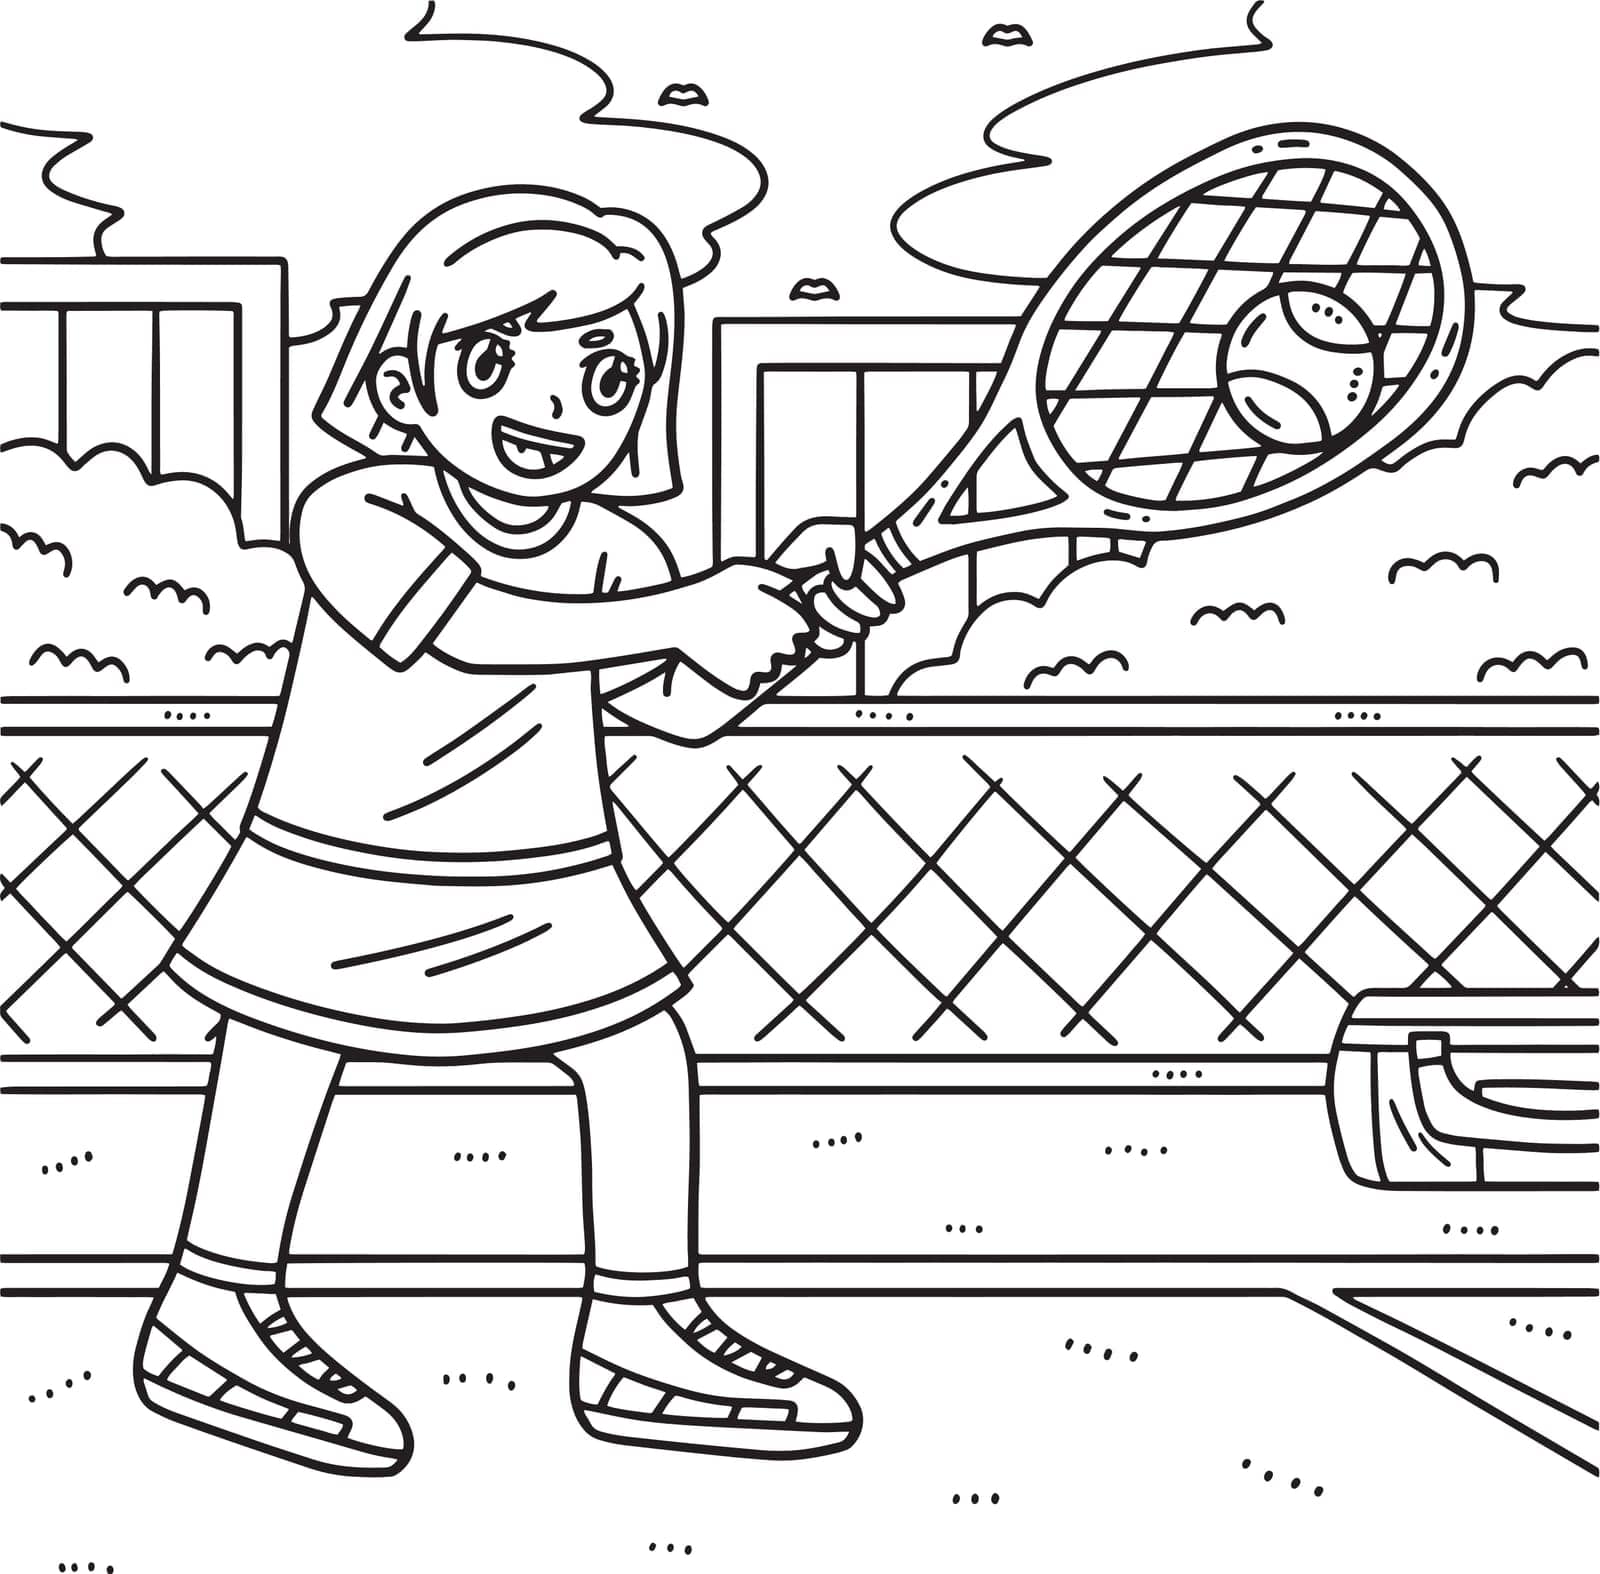 A cute and funny coloring page of a Tennis Female Player Hitting a Ball. Provides hours of coloring fun for children. To color, this page is very easy. Suitable for little kids and toddlers.